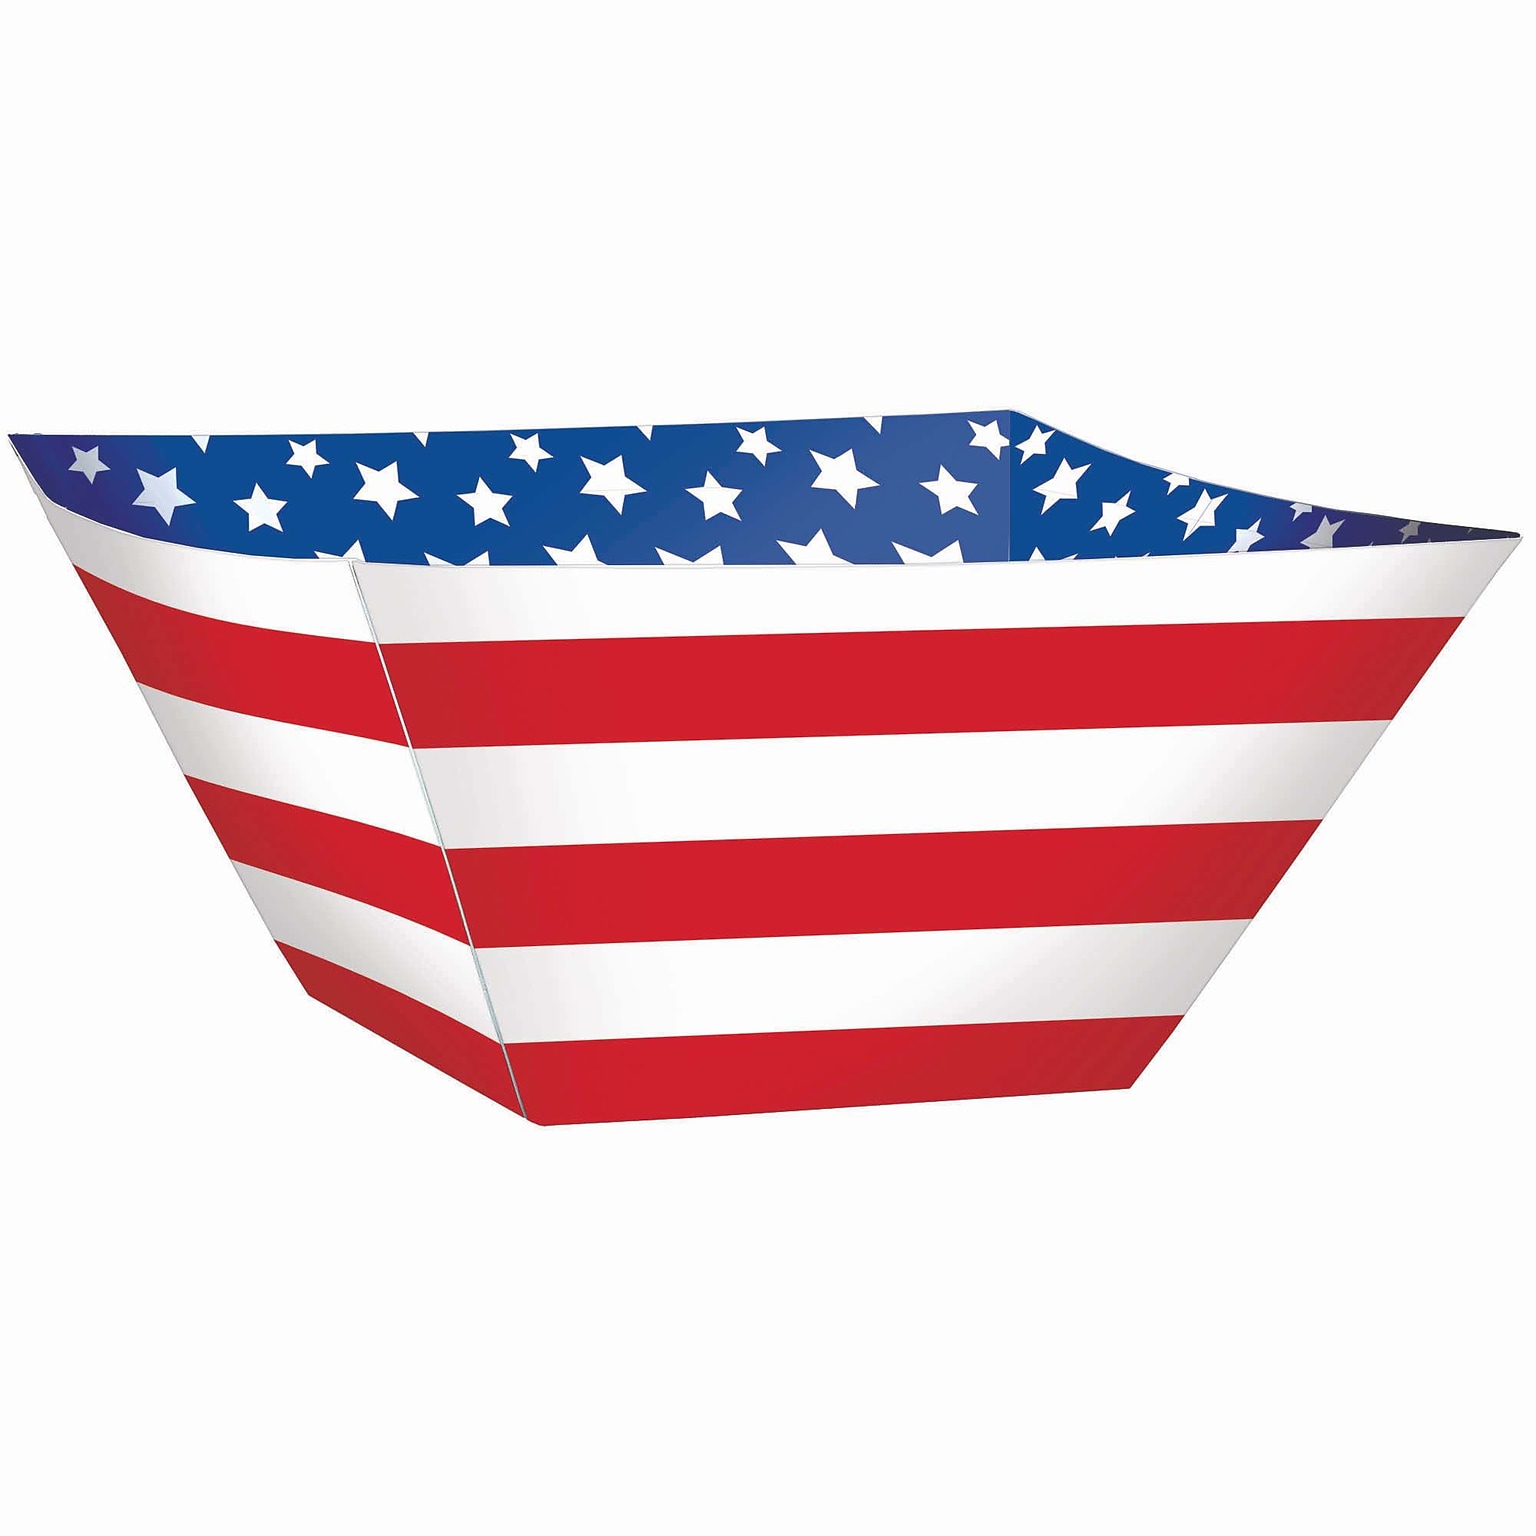 Amscan Stars and Stripes Square Paper Bowl, 12.5 x 12.5, Red/White/Blue, 3/Pack, 3 Per Pack (370312)